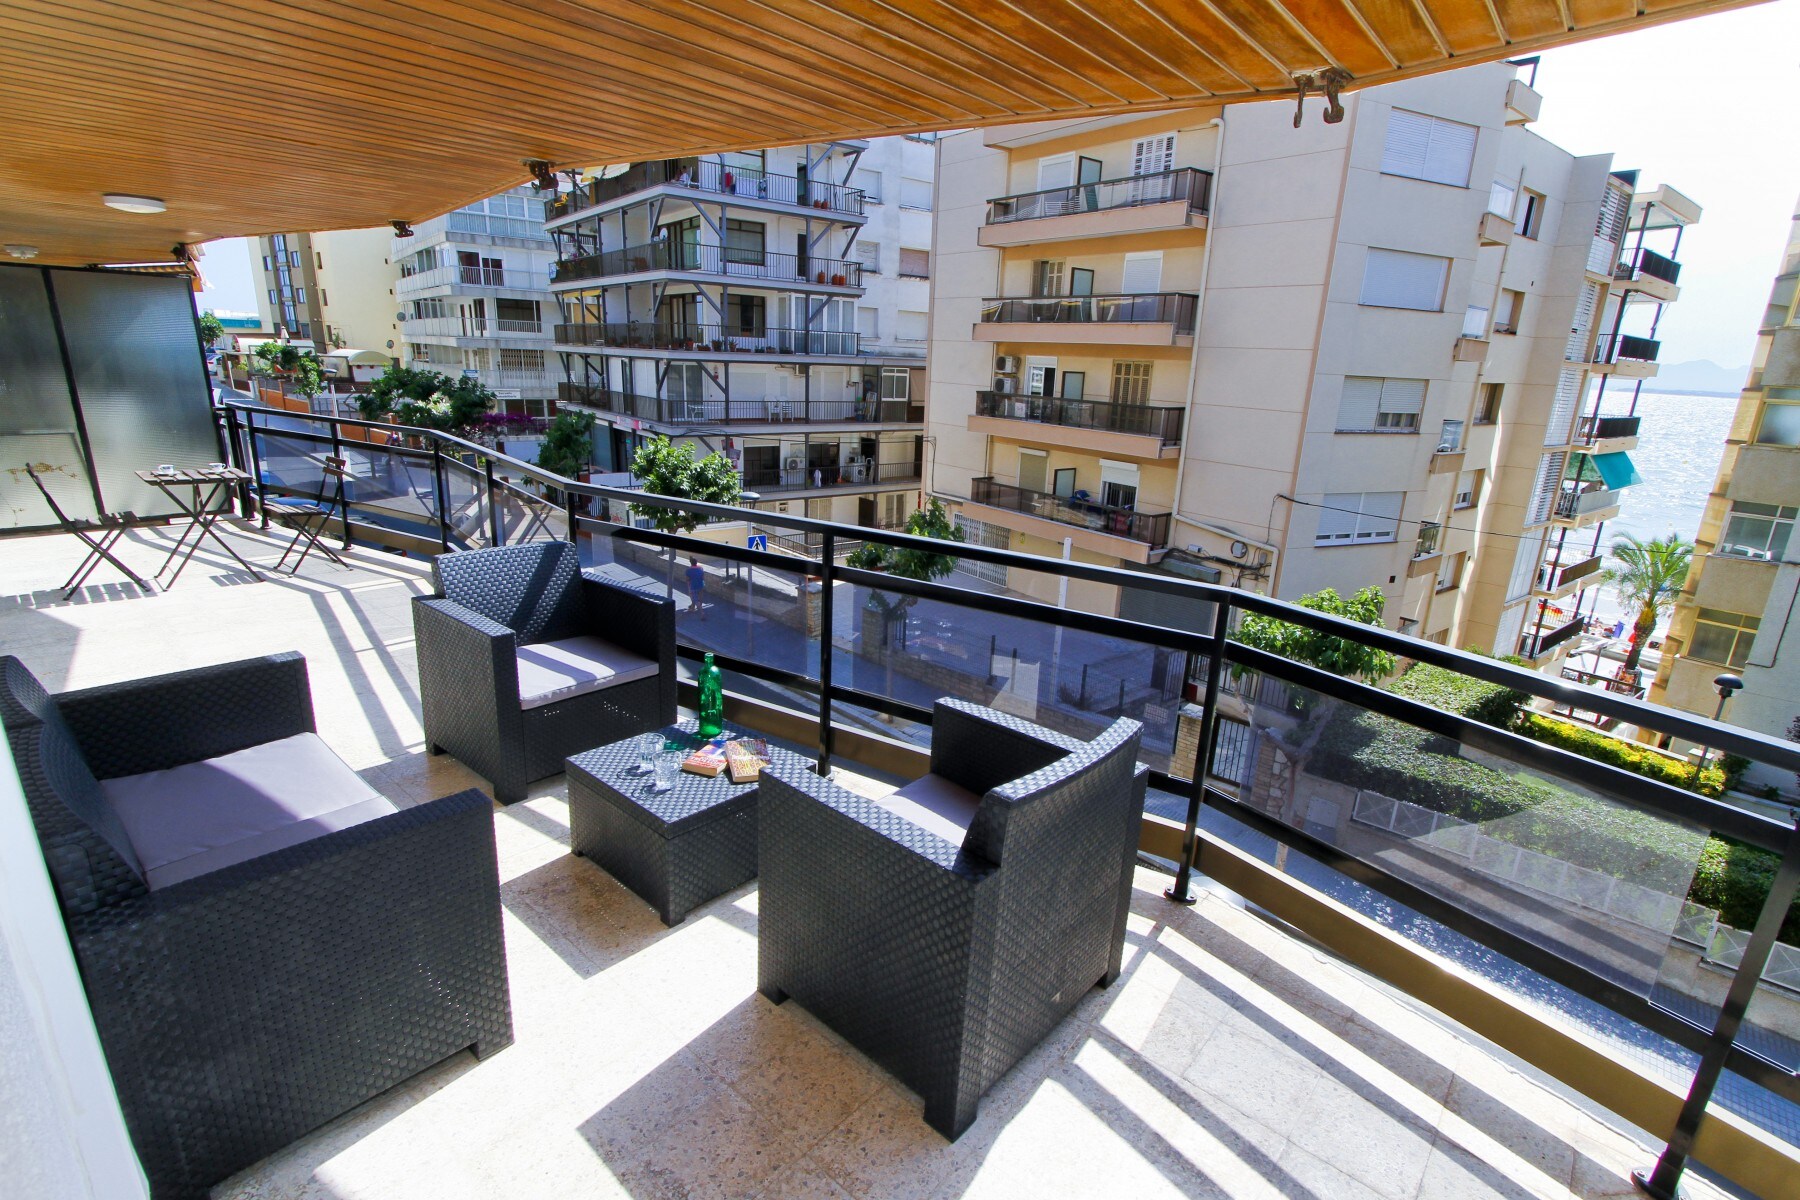 Property Image 1 - Sensational apartment located 50m from the beach in Salou